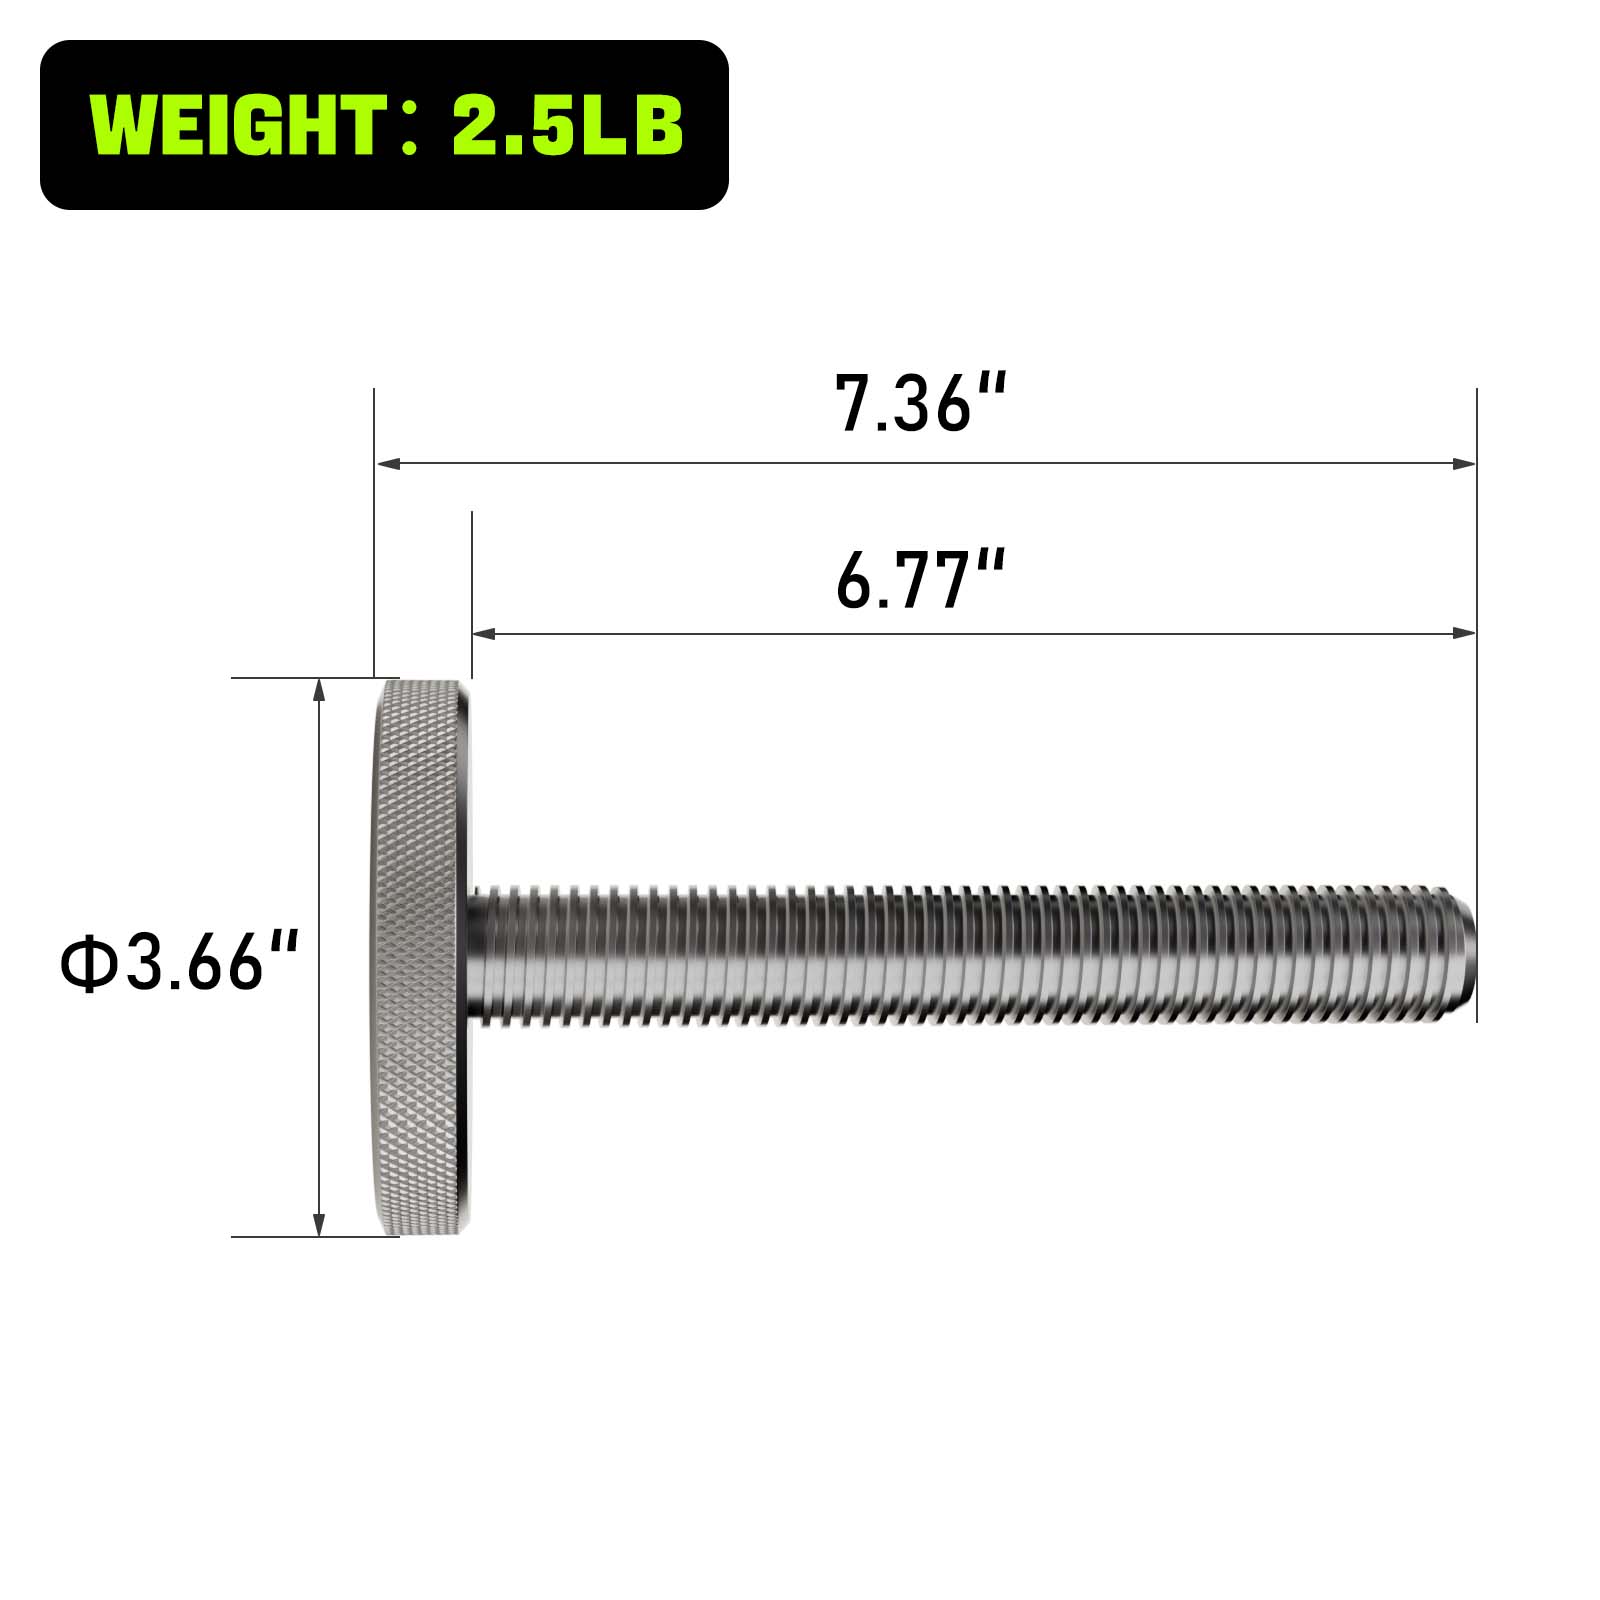 Longer Screw, 2 pieces, for A-030 adjustable dumbbell, up to 160LB